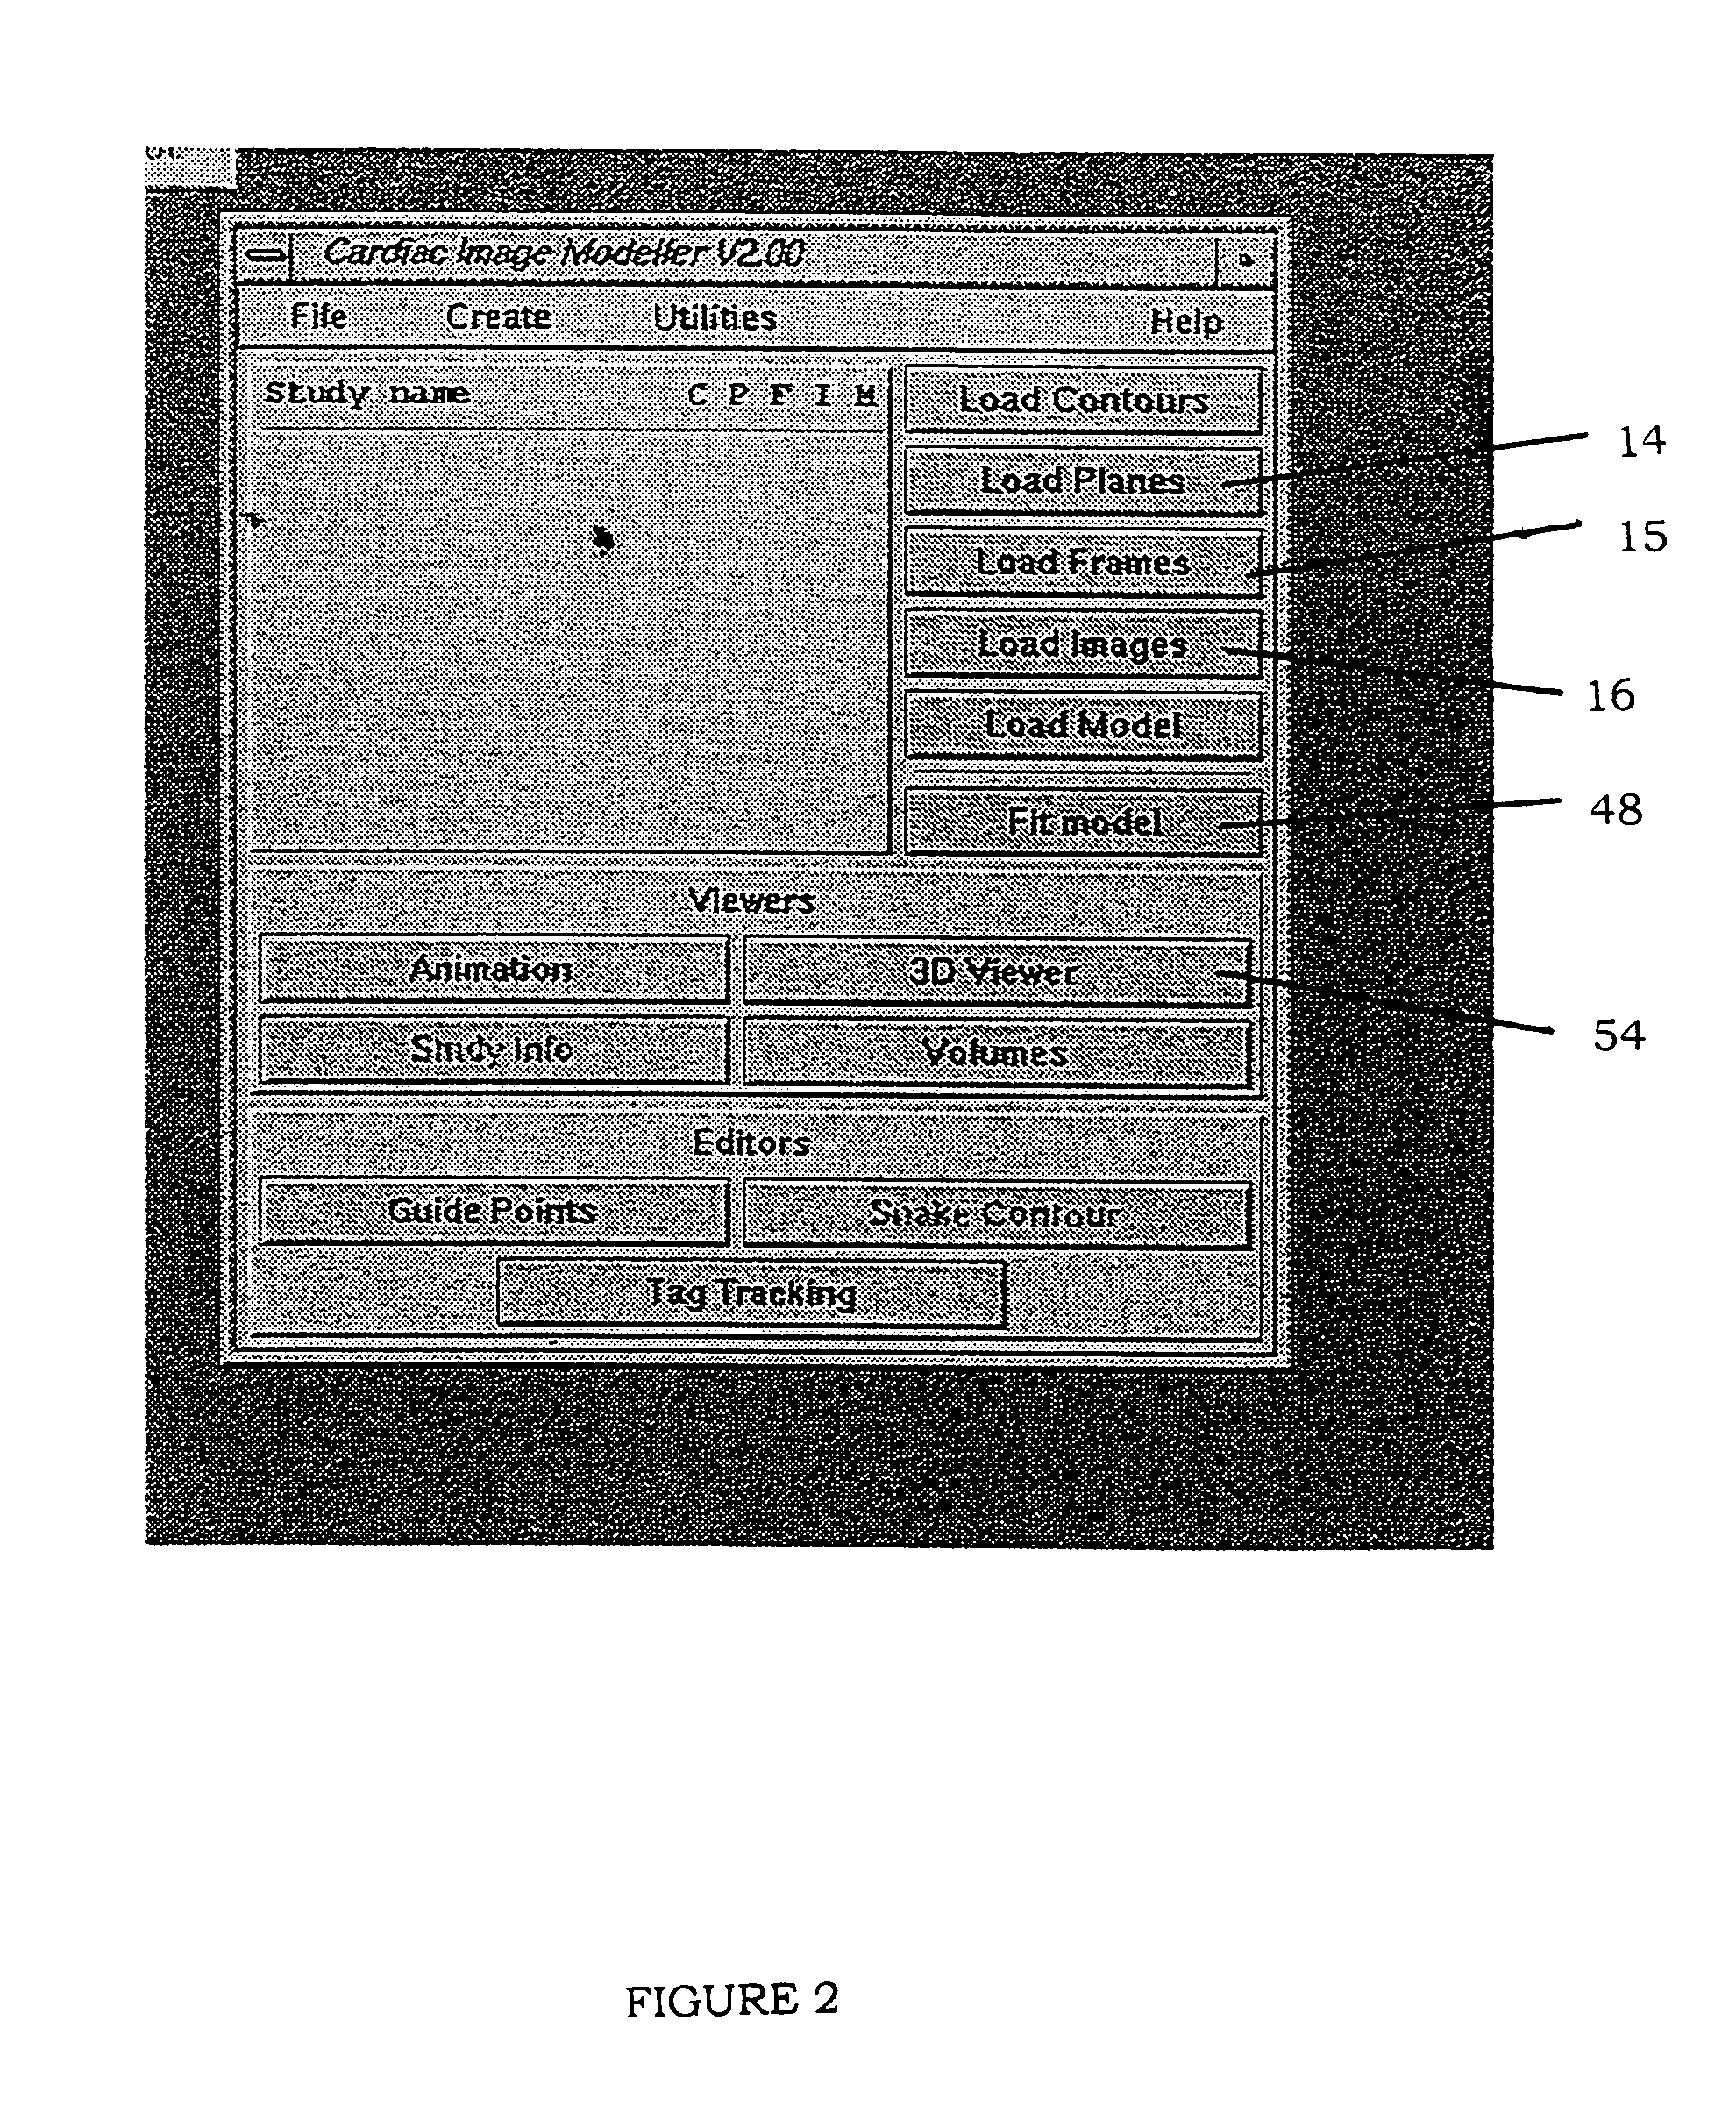 Method and system of measuring characteristics of an organ